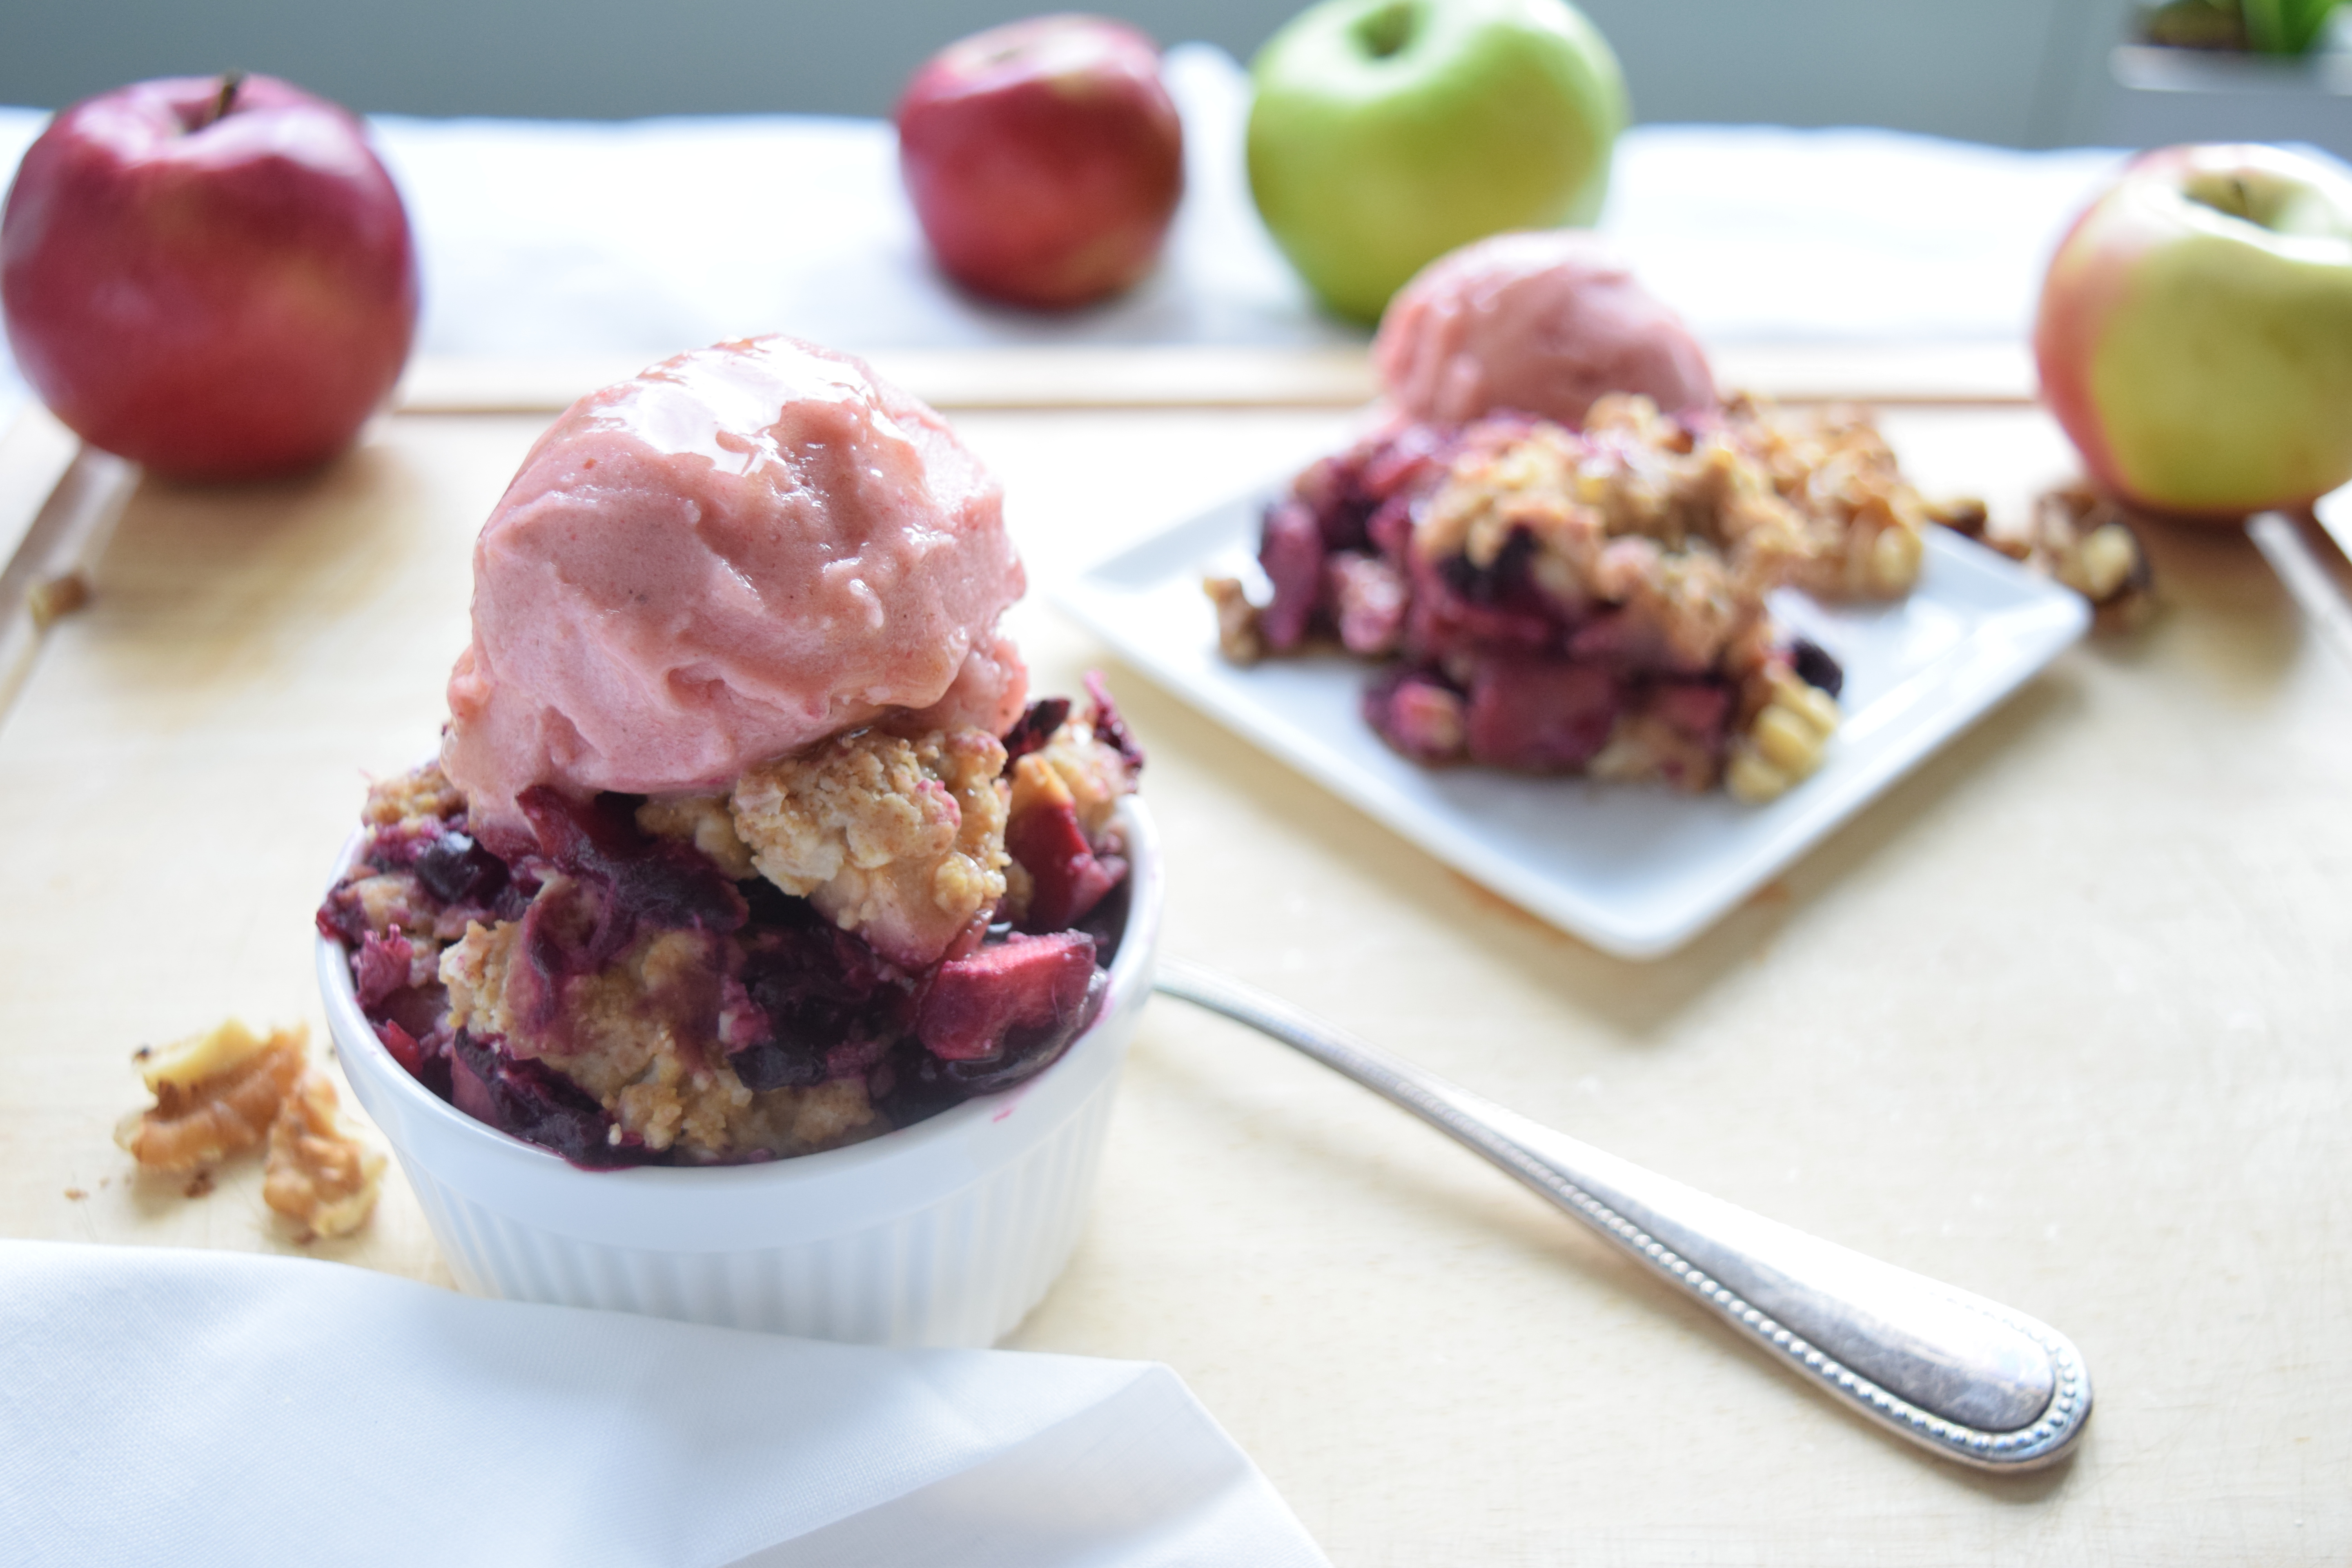 Vegan Blueberry, Apples and Coconut Crumble